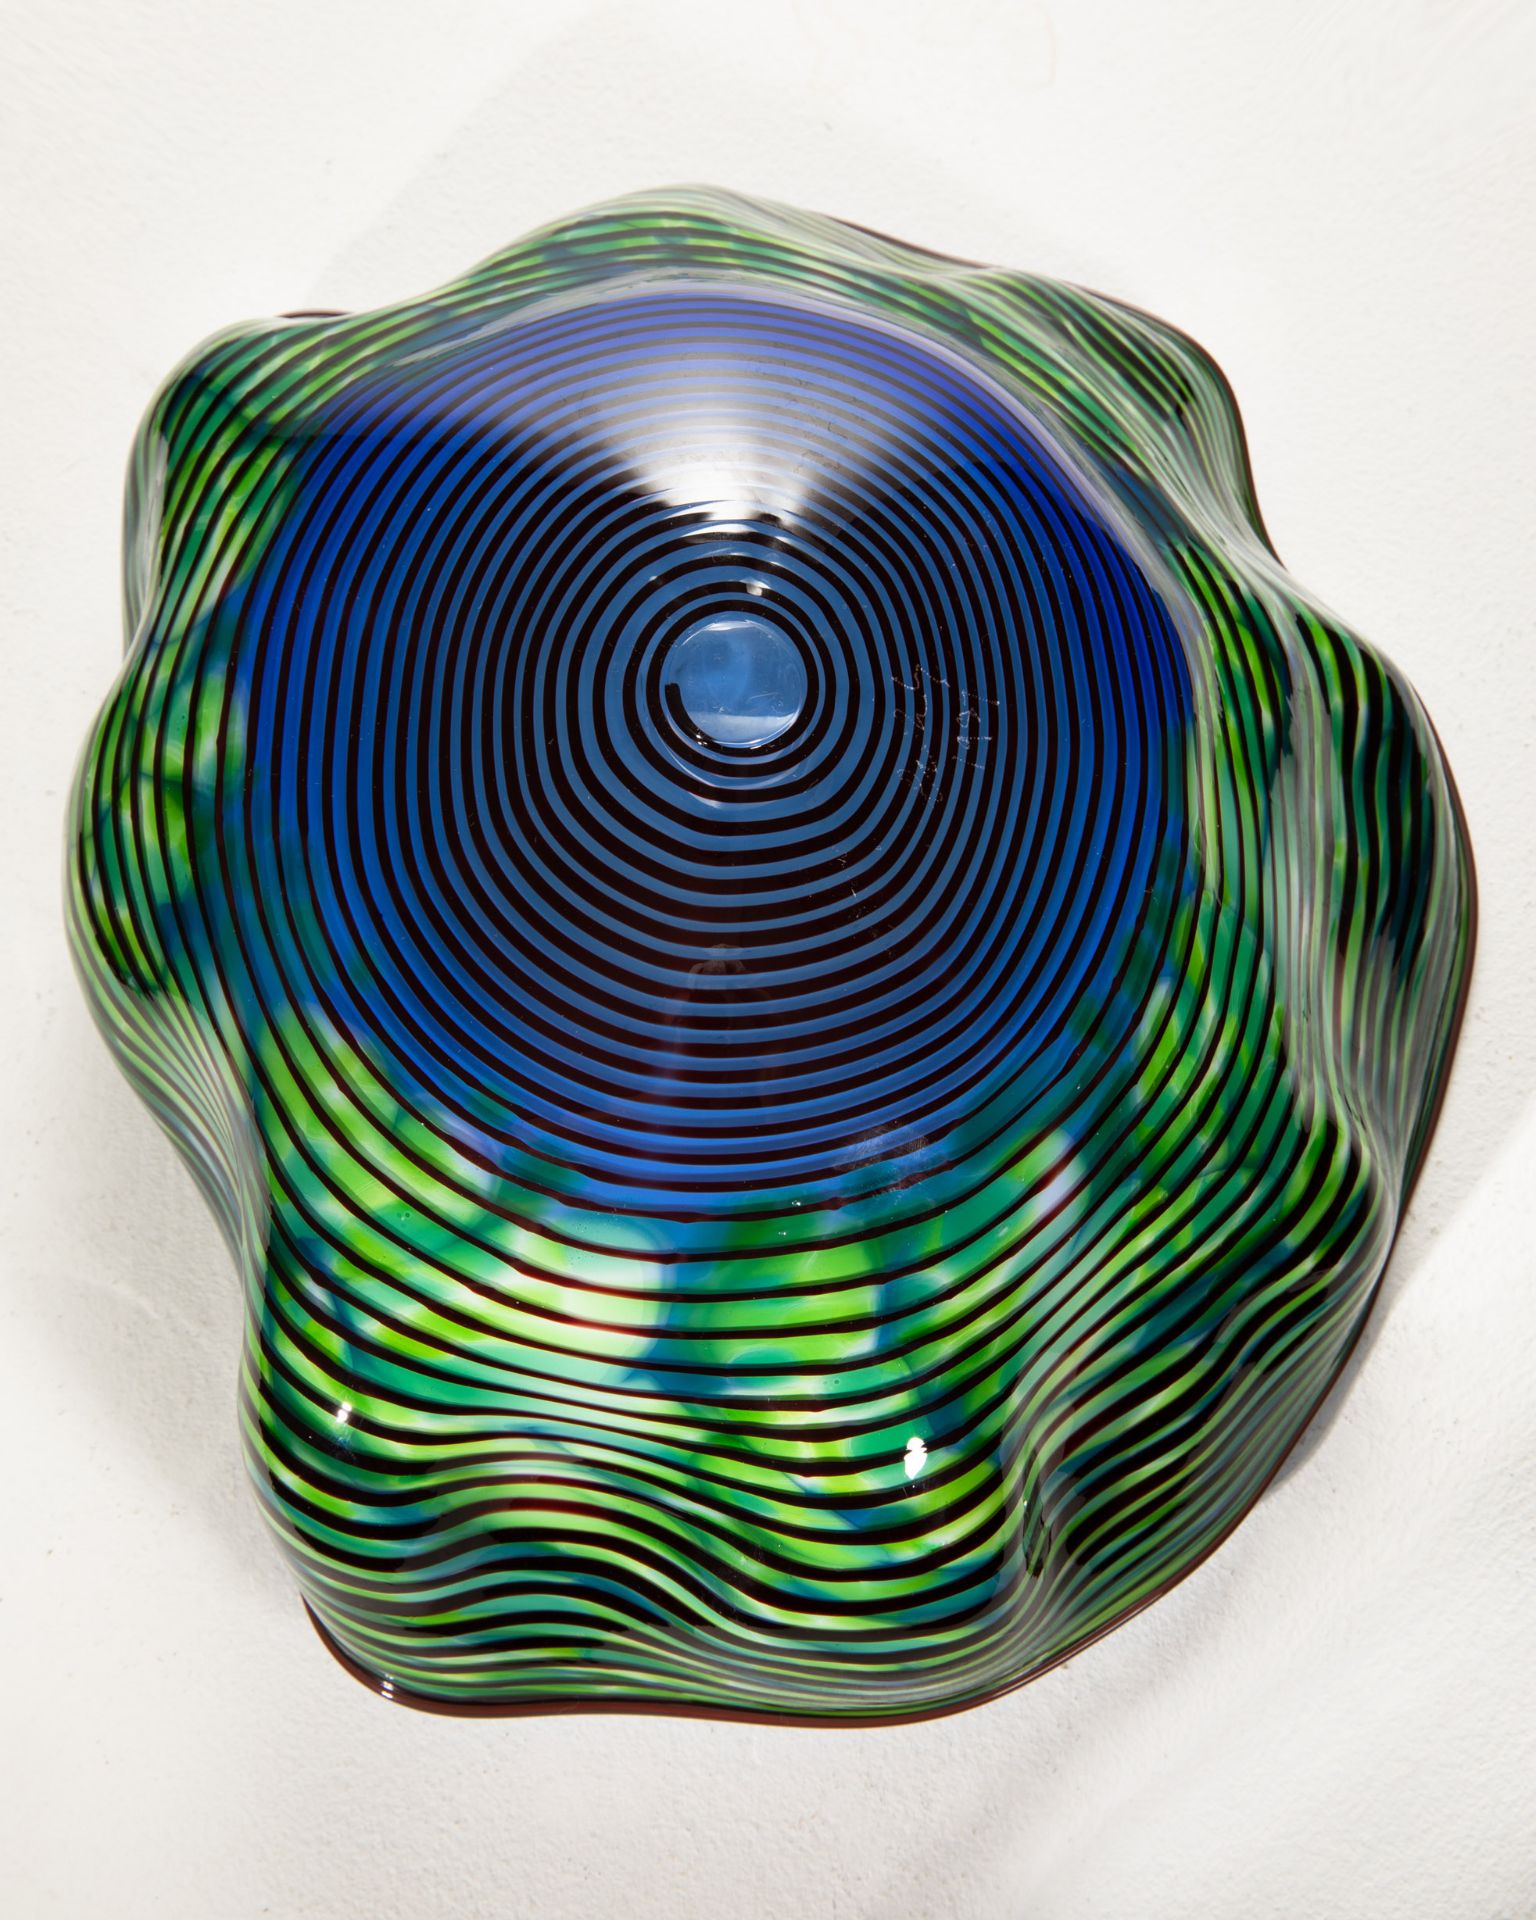 Dale Chihuly, 3 seaforms piece sculptural glasforms - Image 10 of 17